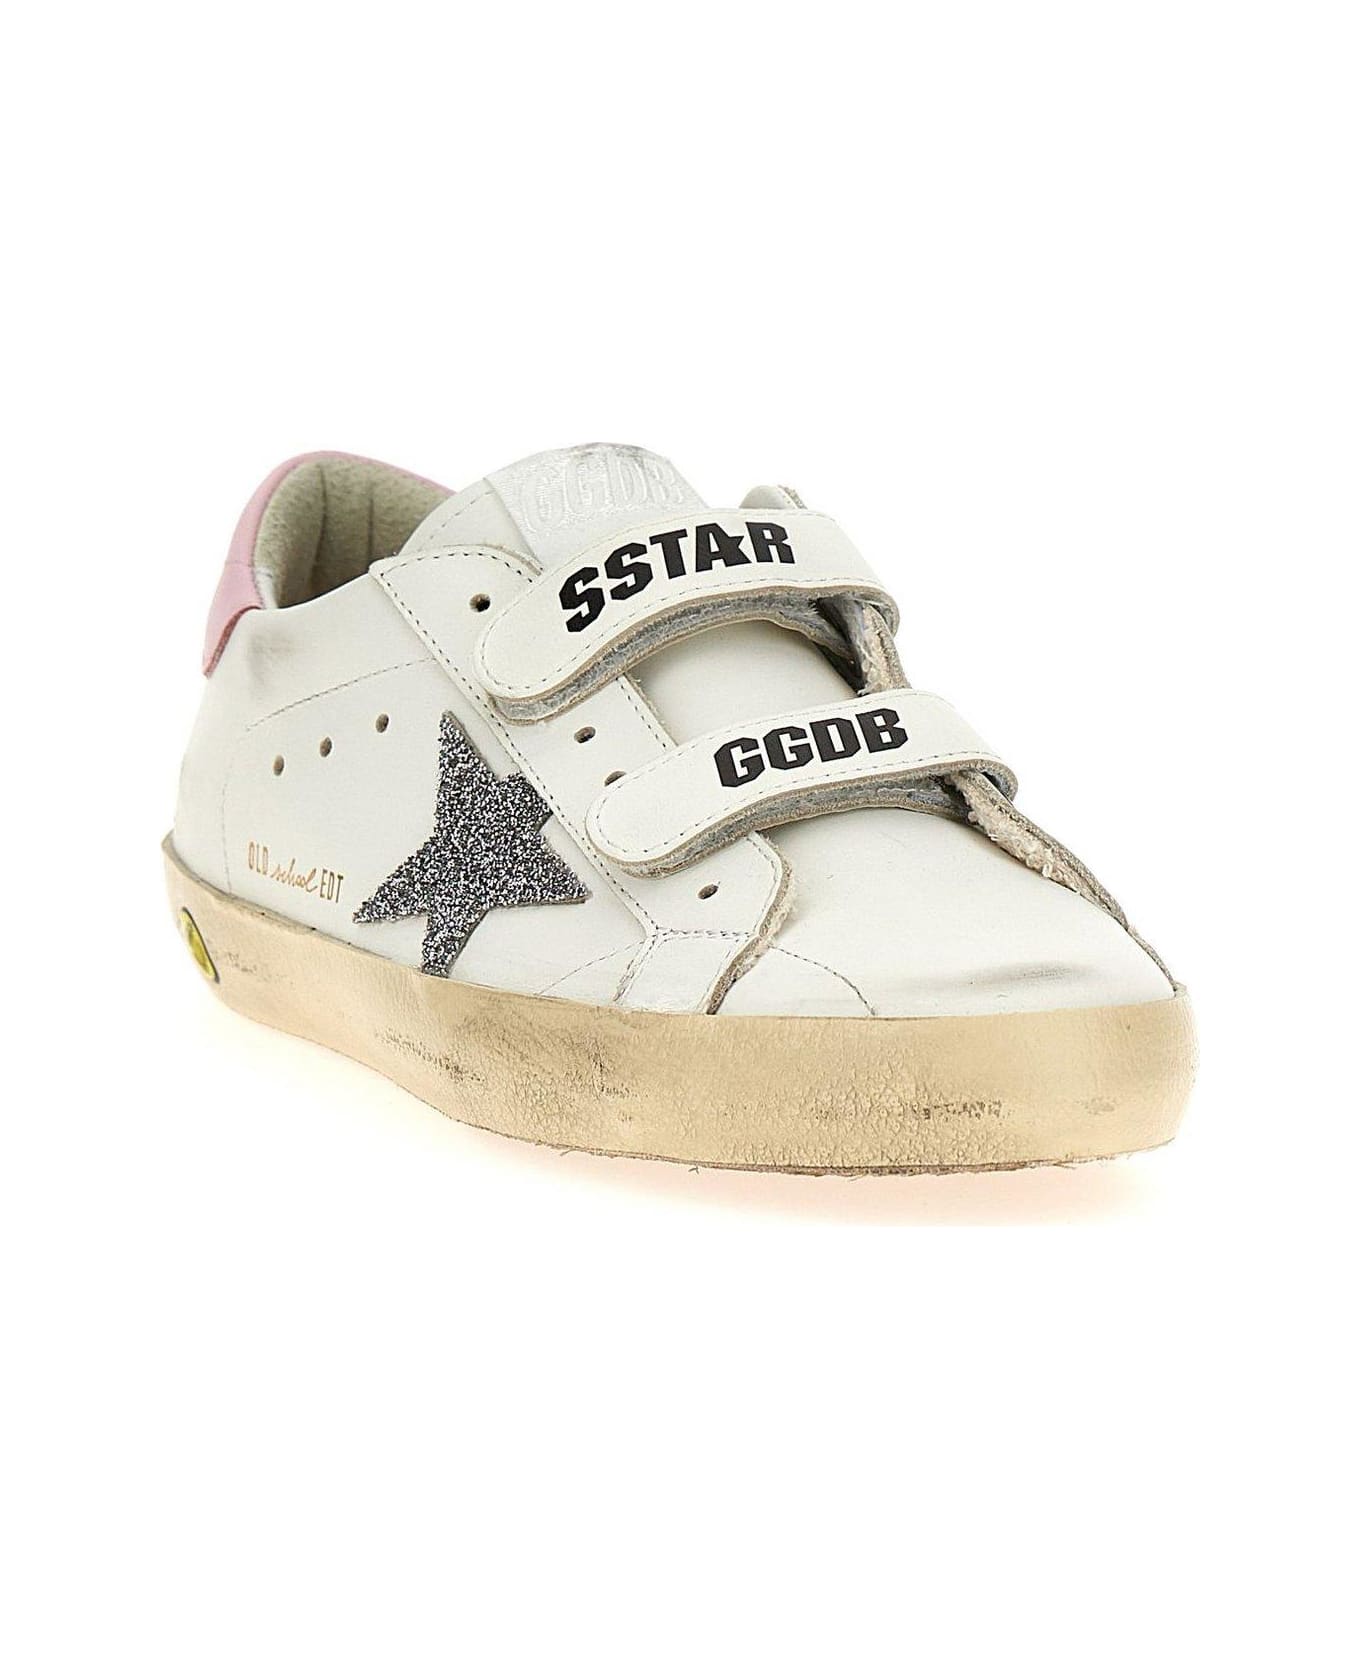 Golden Goose Old School Lace-up Sneakers - White Crystal Orchid Pink